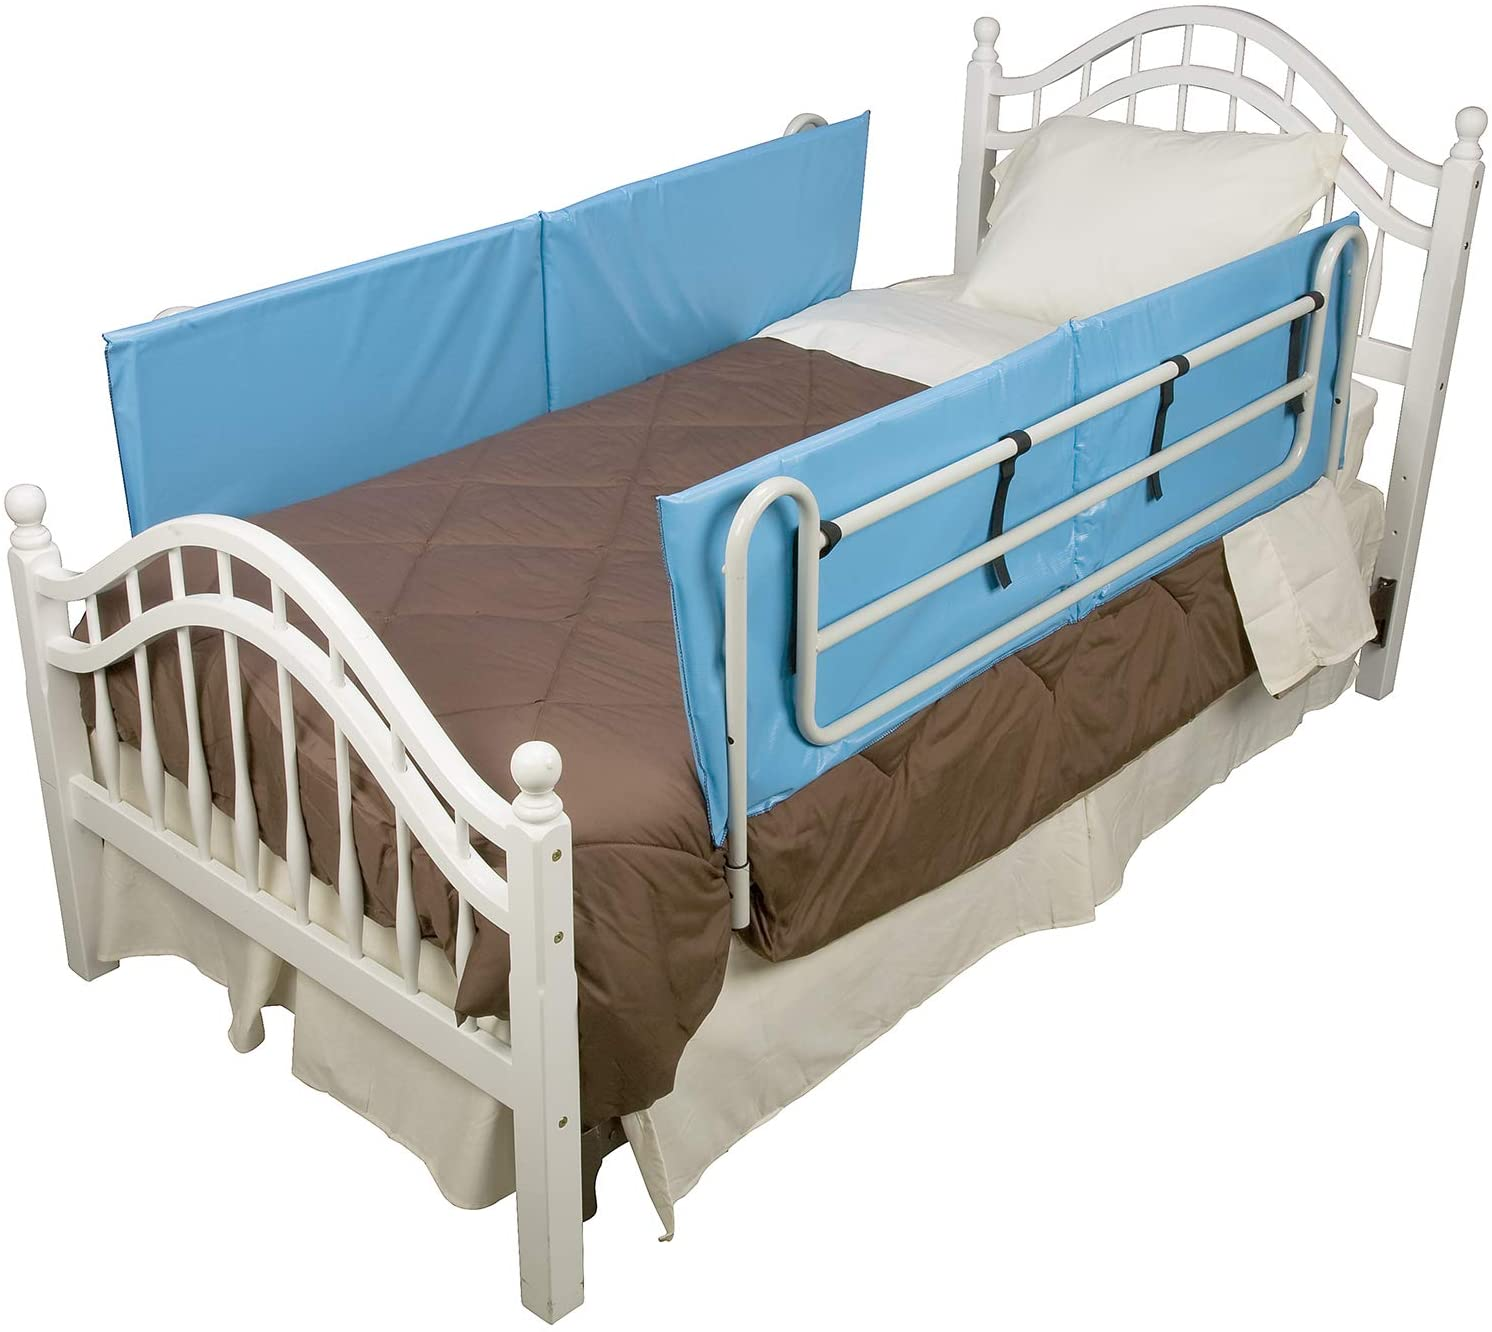 Foam guard rails with a bed can also be used on the headboard side